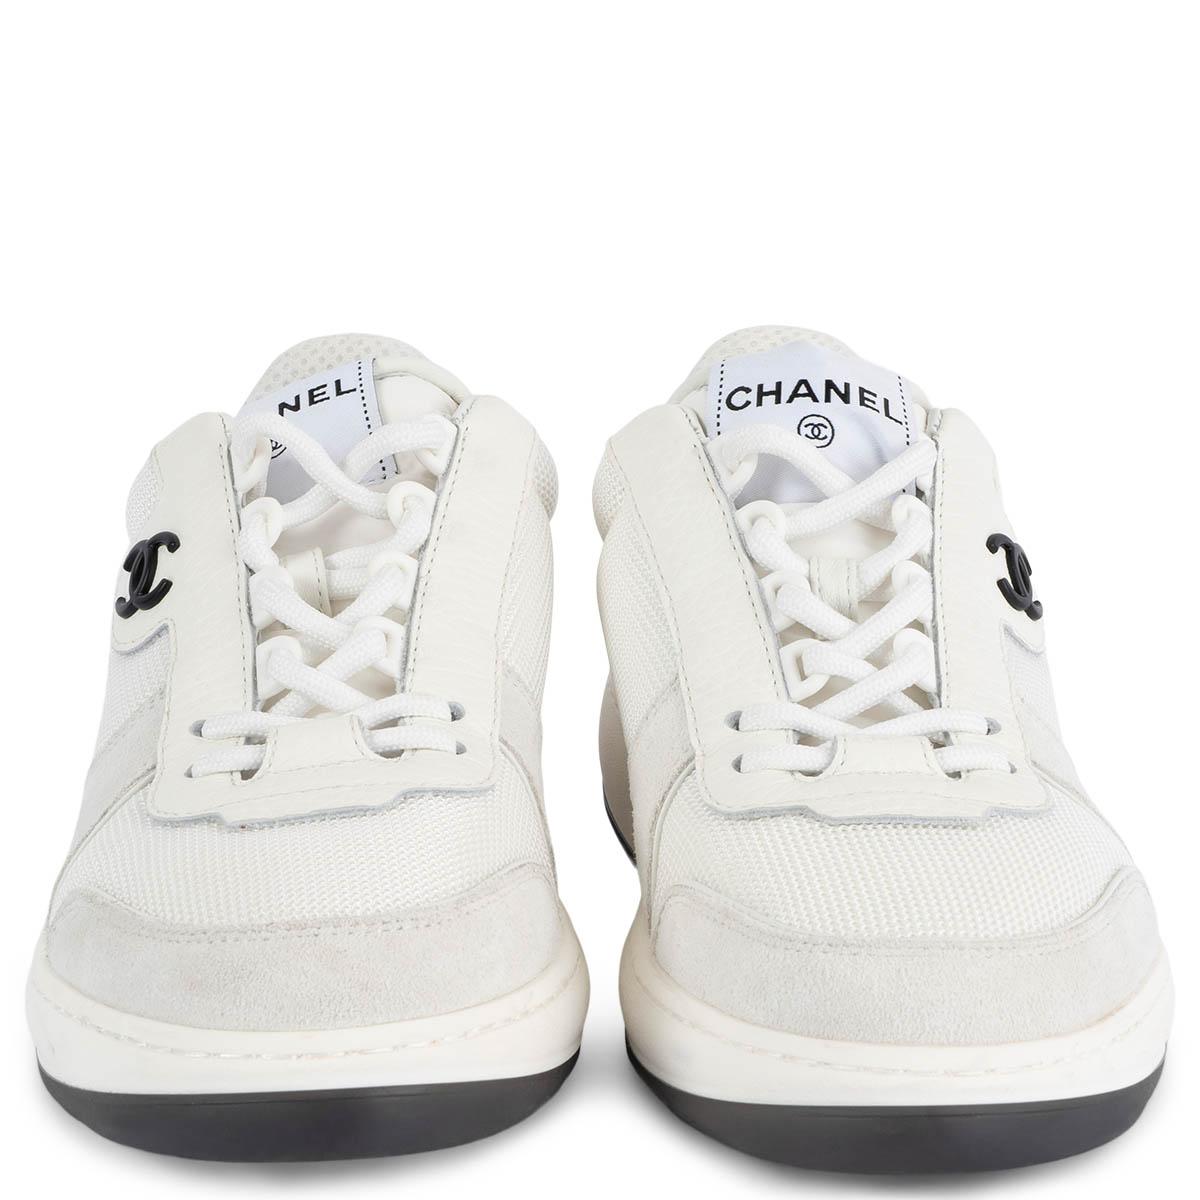 100% authentic Chanel 2022 low-top sneakers in white mesh and leather with details in light grey suede. Embellished with black CC logo on the side and in white leather on the heel. Have been worn and are in excellent condition.